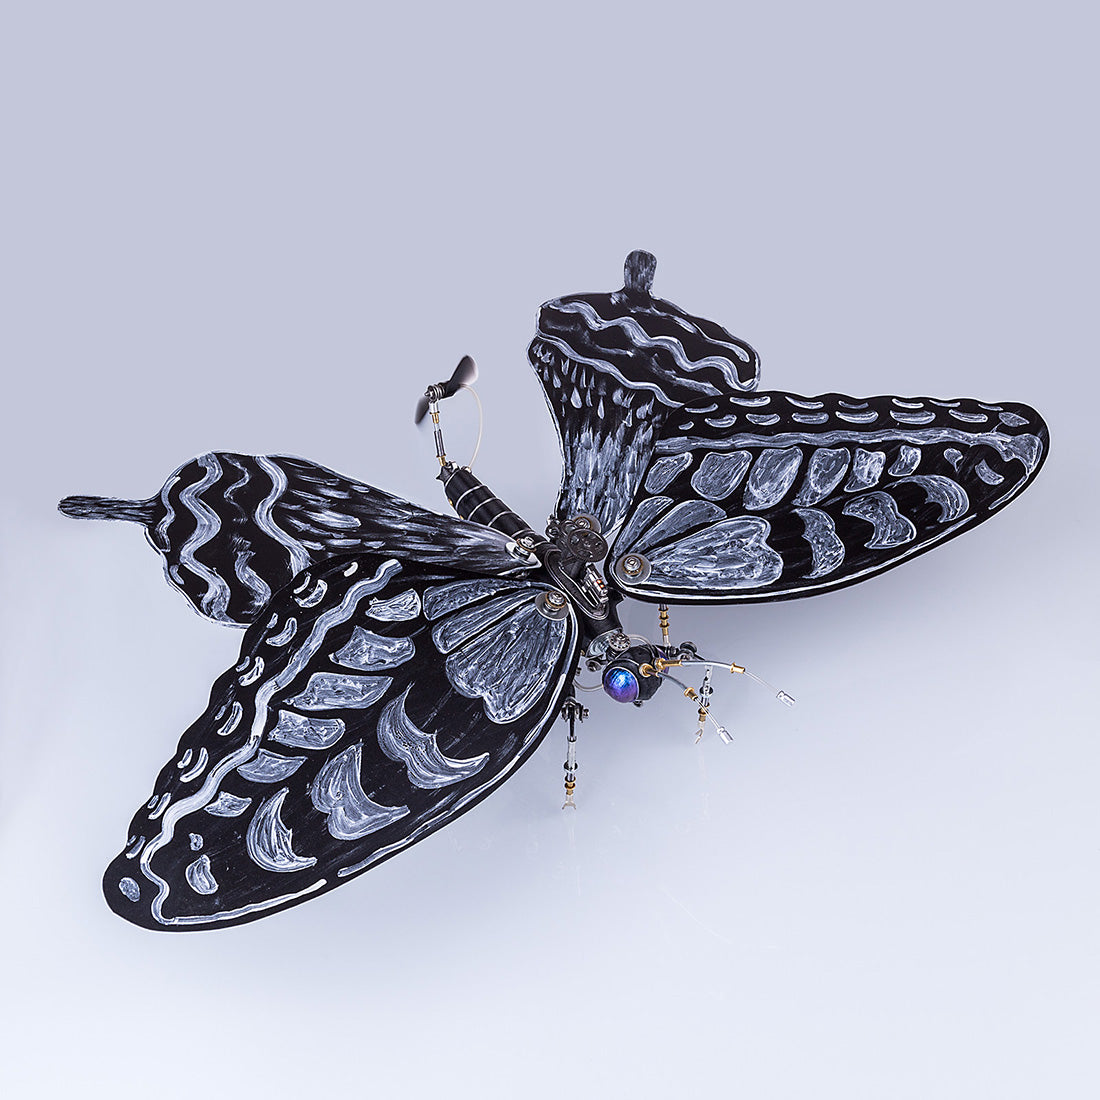 Mechanical Metal Black and White Butterfly Steampunk Insect Sculpture Art  Assembled